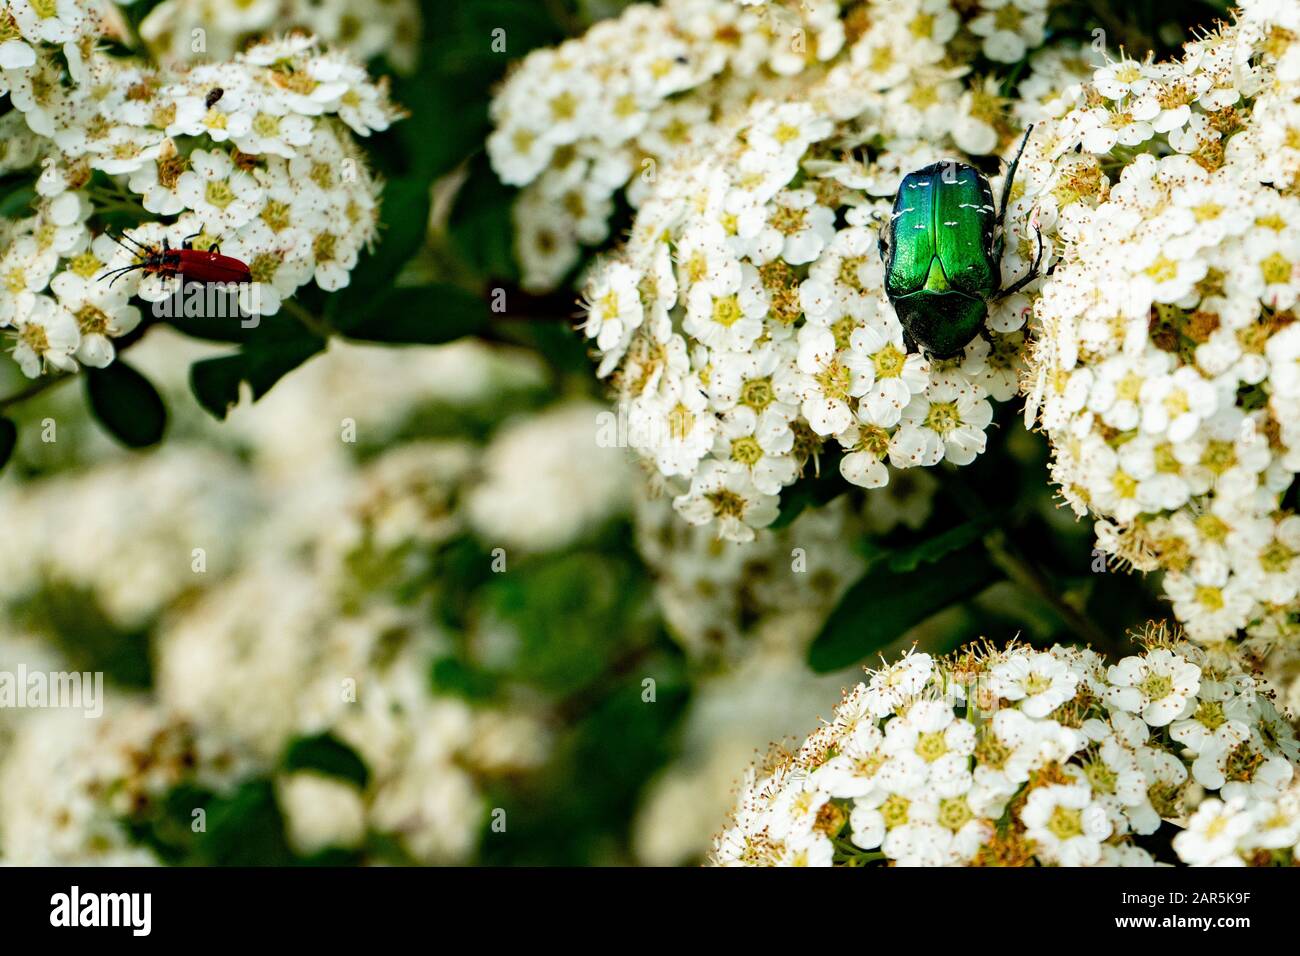 Blooming spirea or meadowsweet. Branches with white flowers. Beetle Eats Nectar. Stock Photo